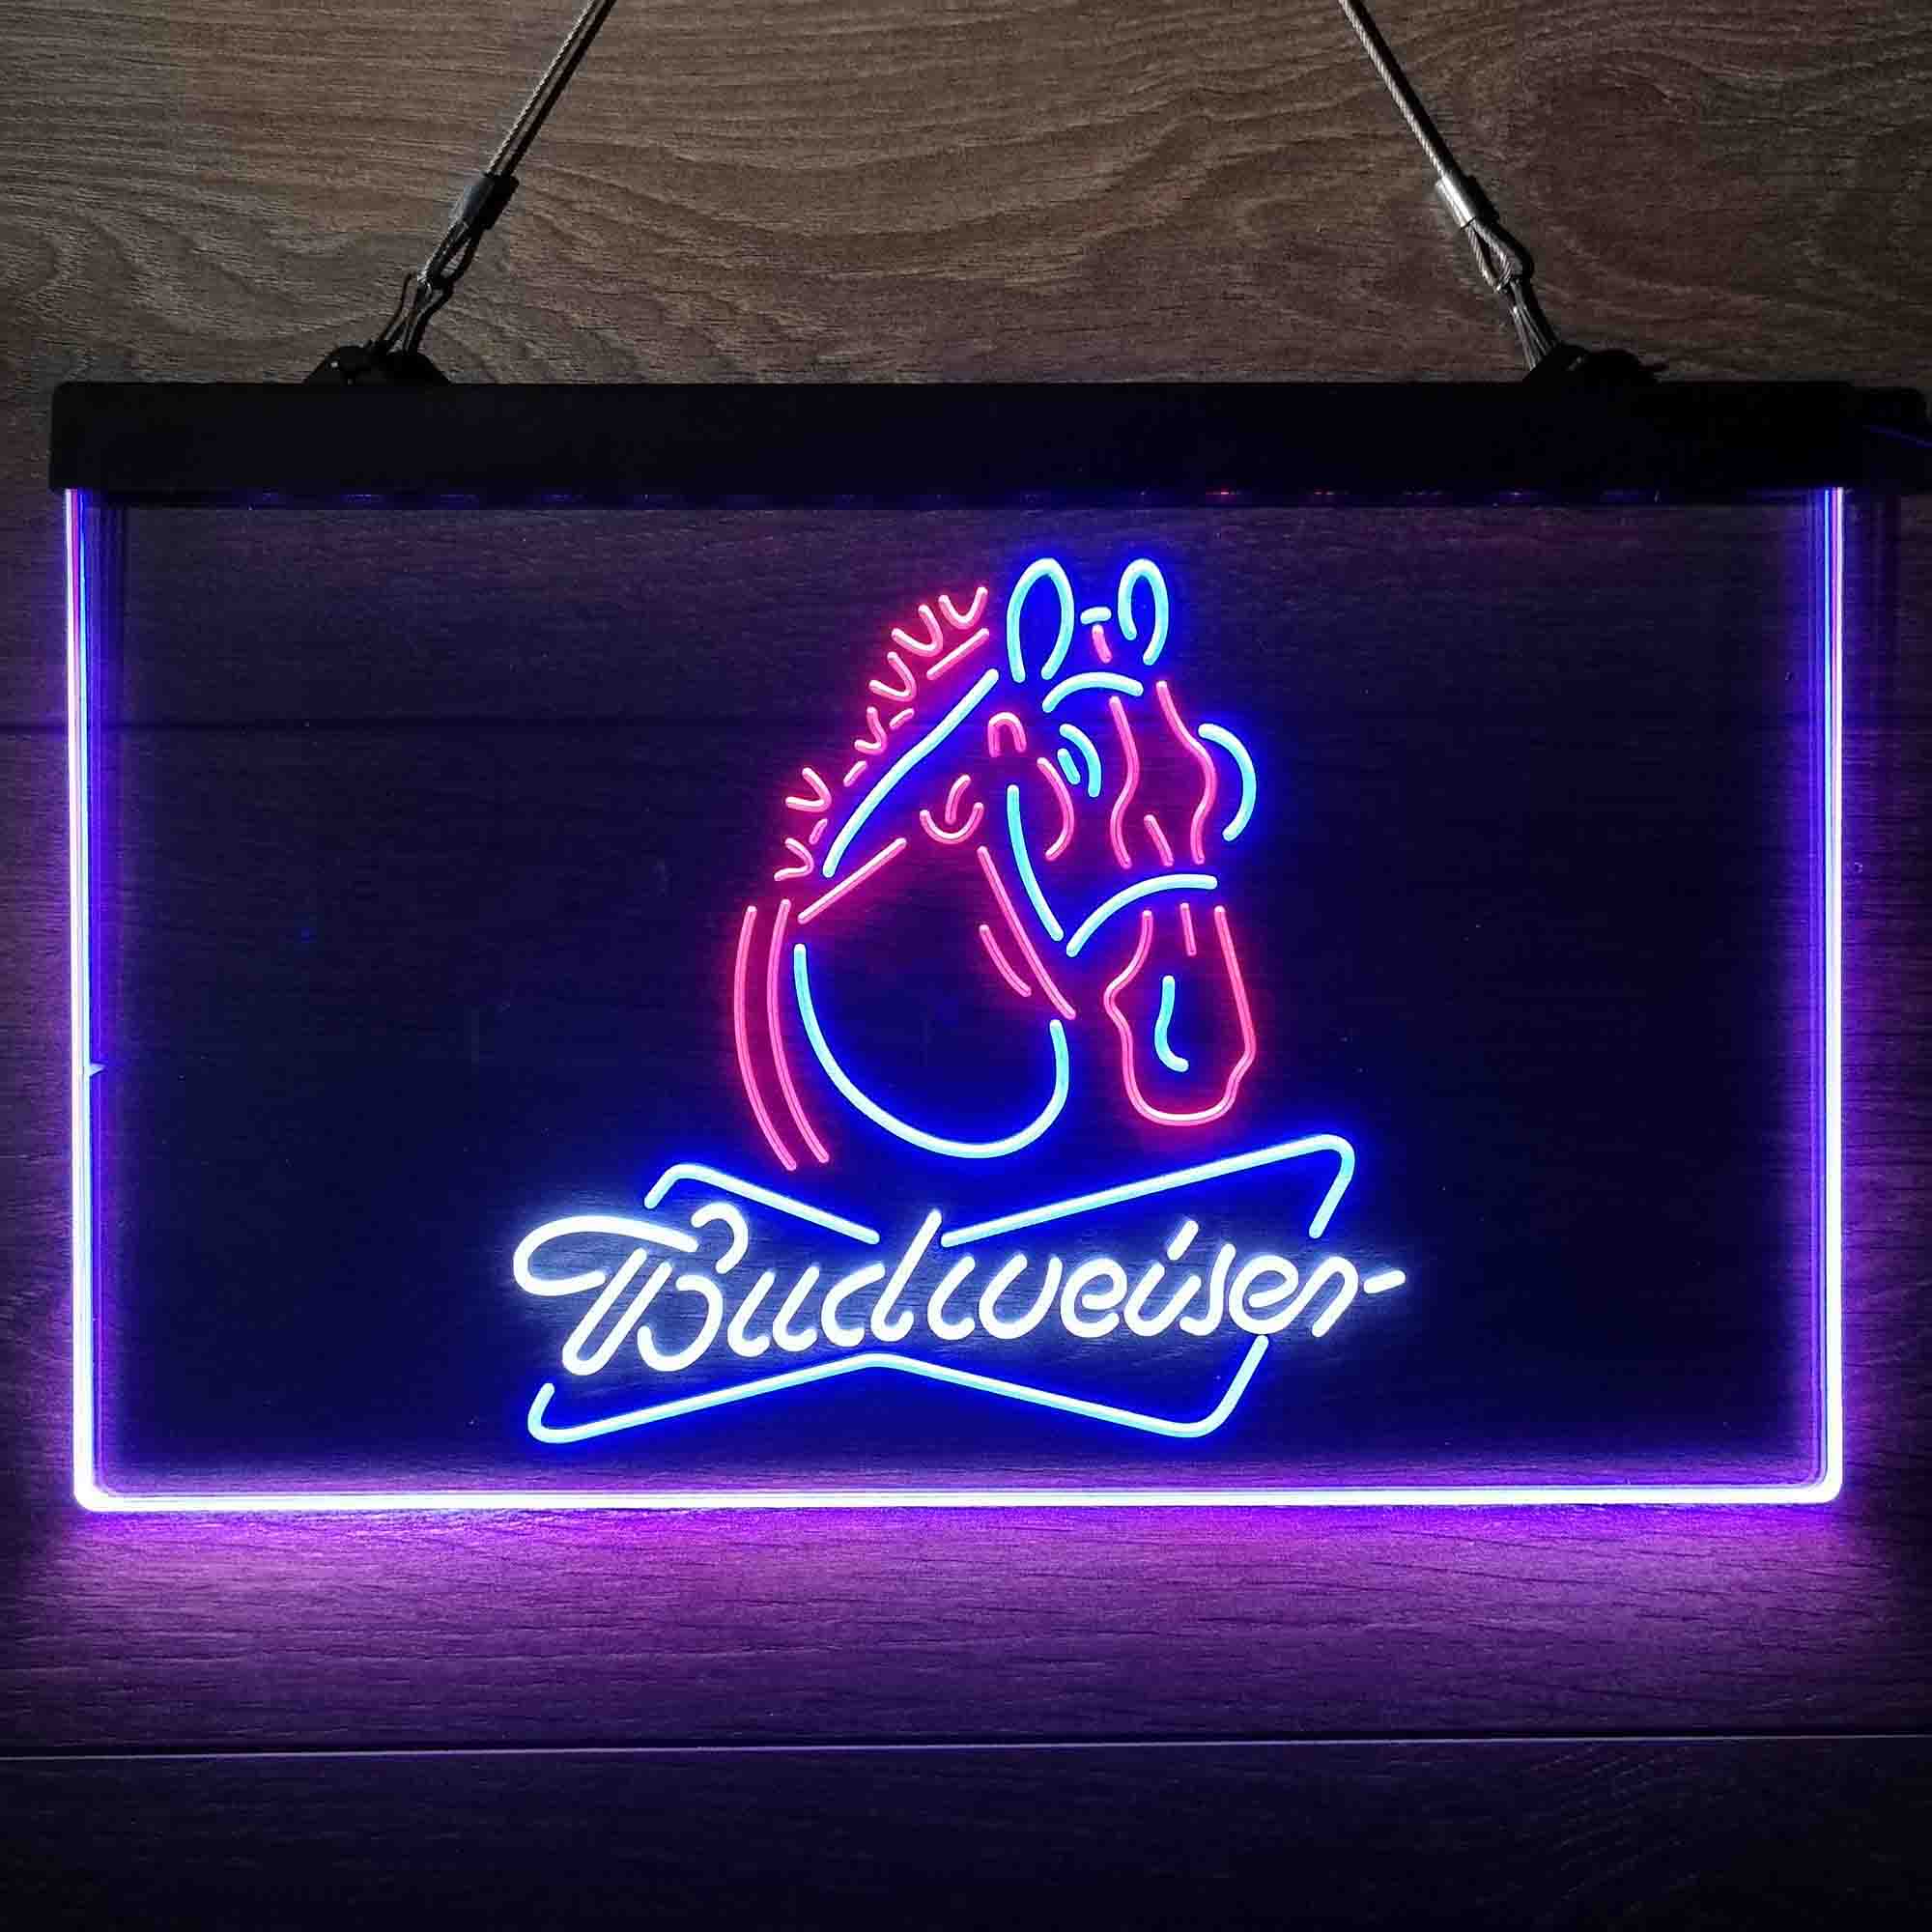 Budweiser Clydesdale Horse Head Neon 3-Color LED Sign